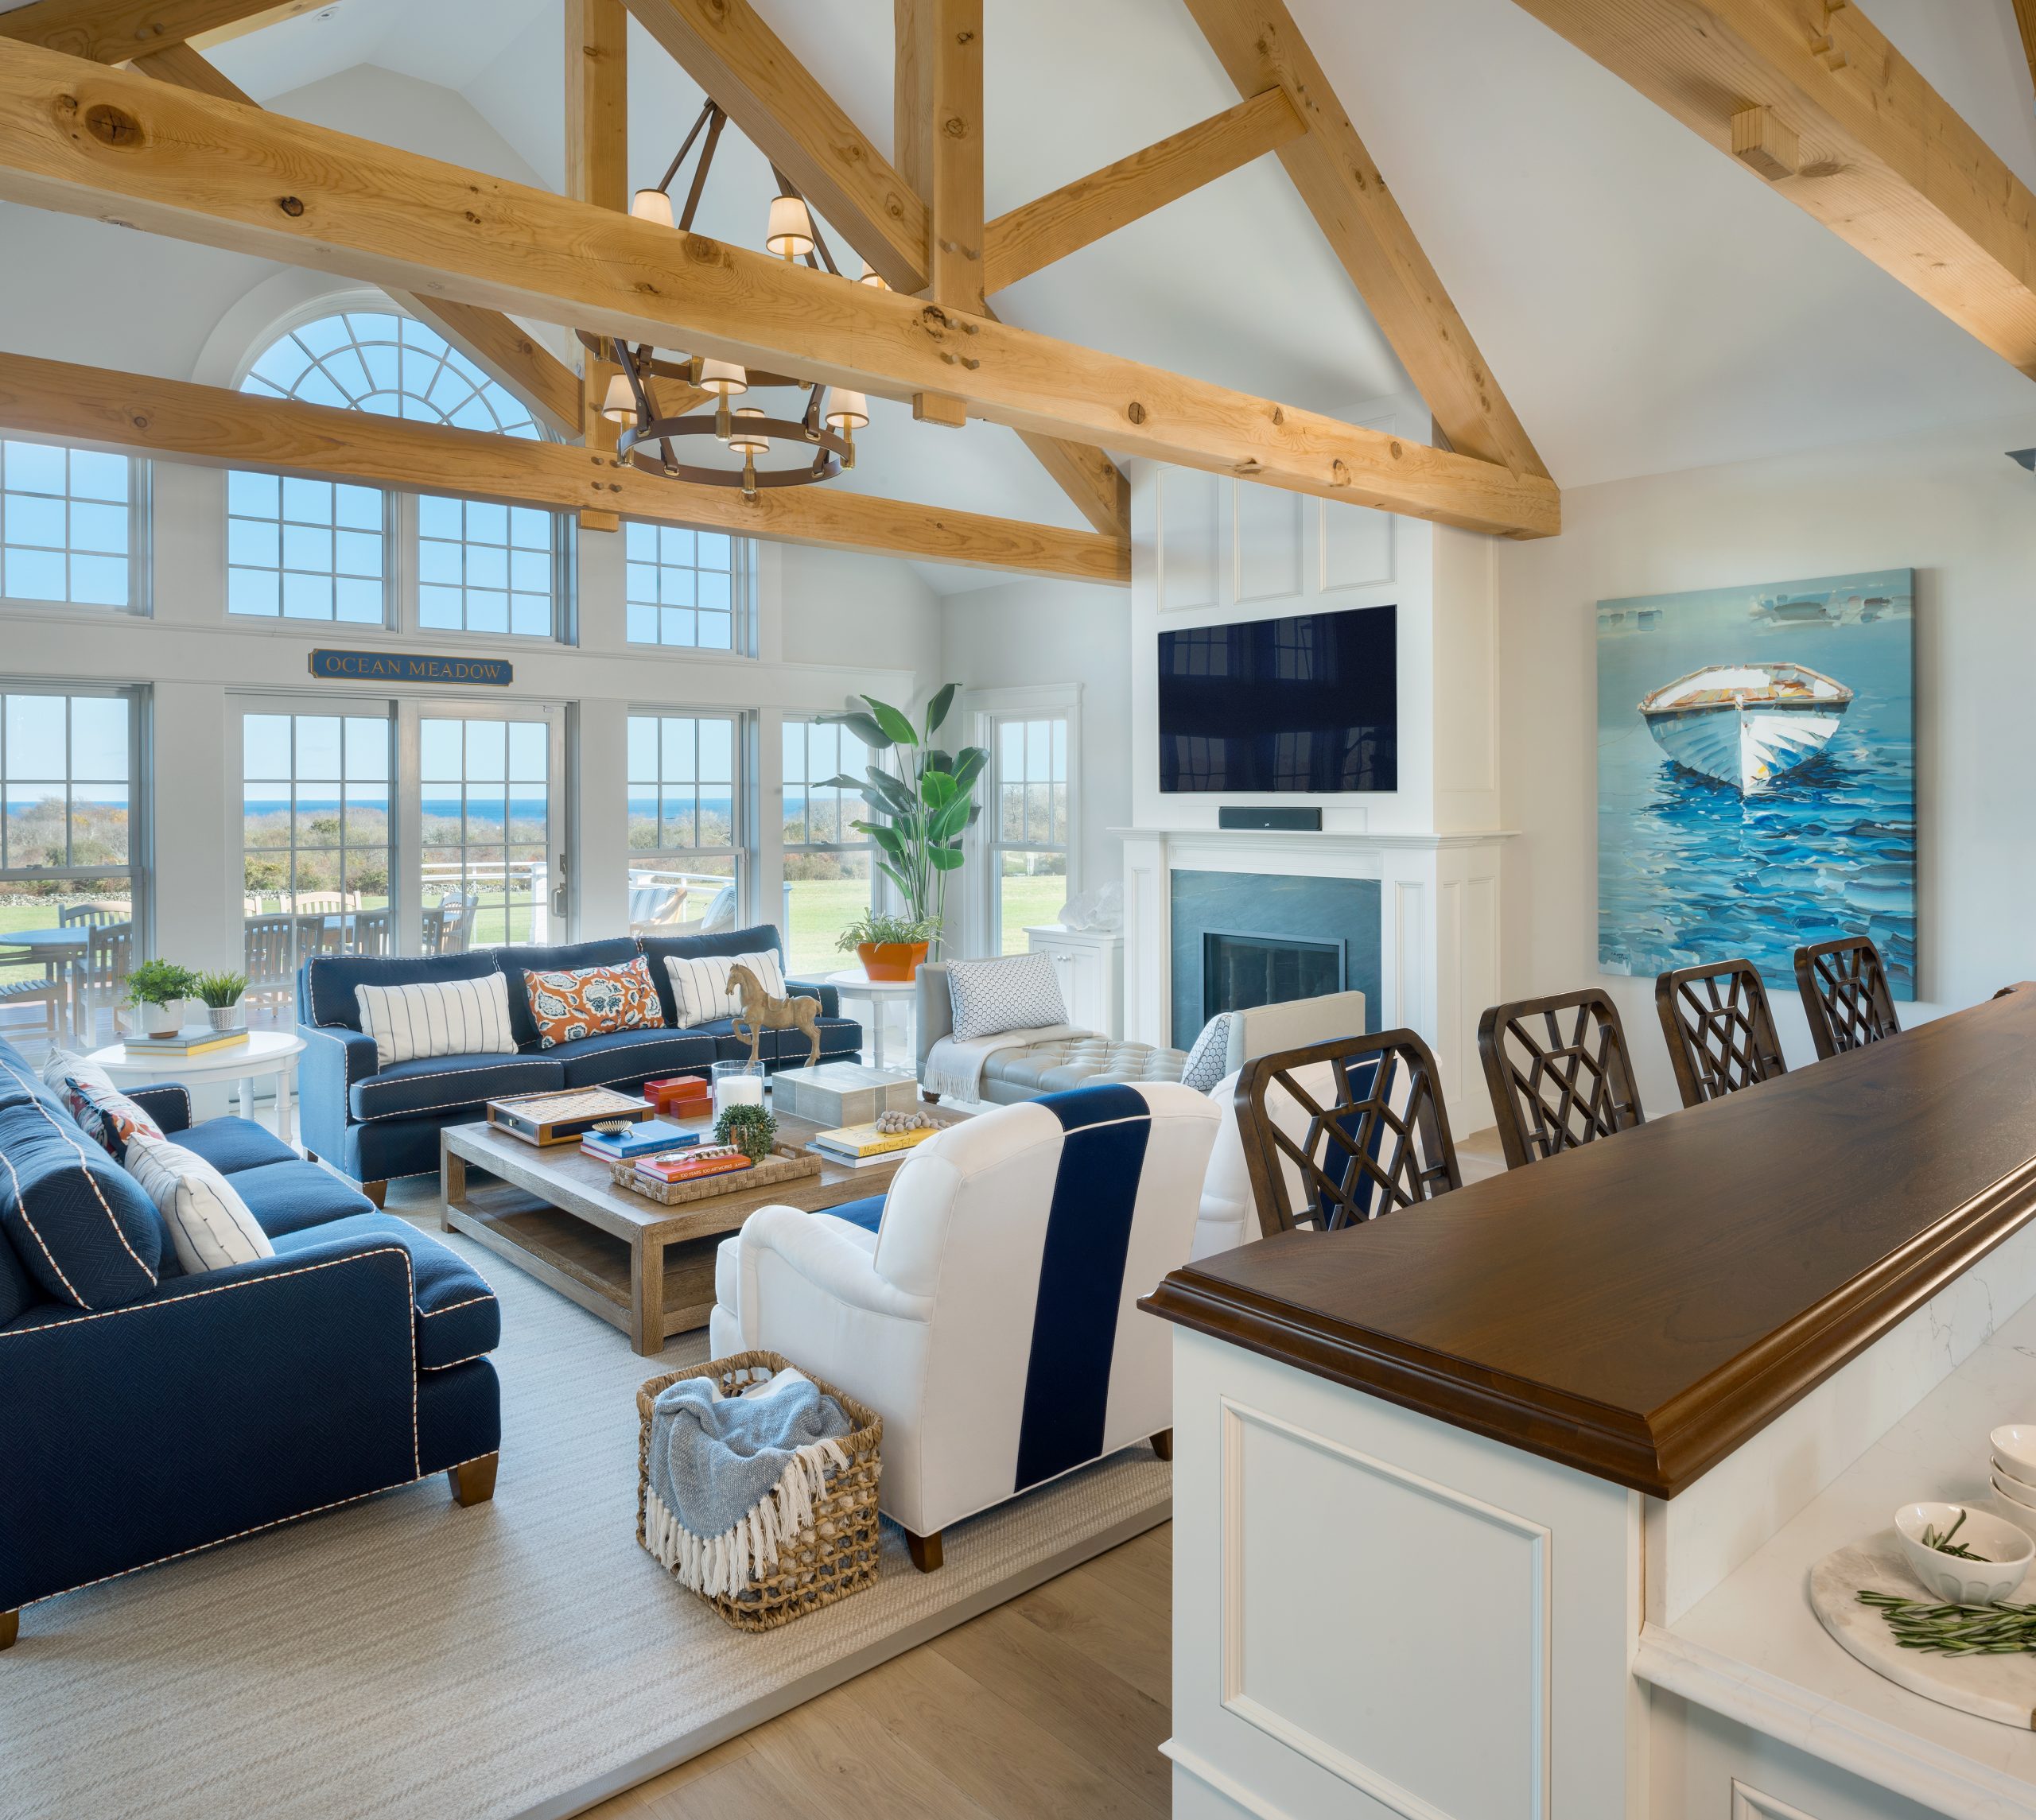 The Ocean Meadow project by Blakely Interior Design (Photo: Aaron Usher)